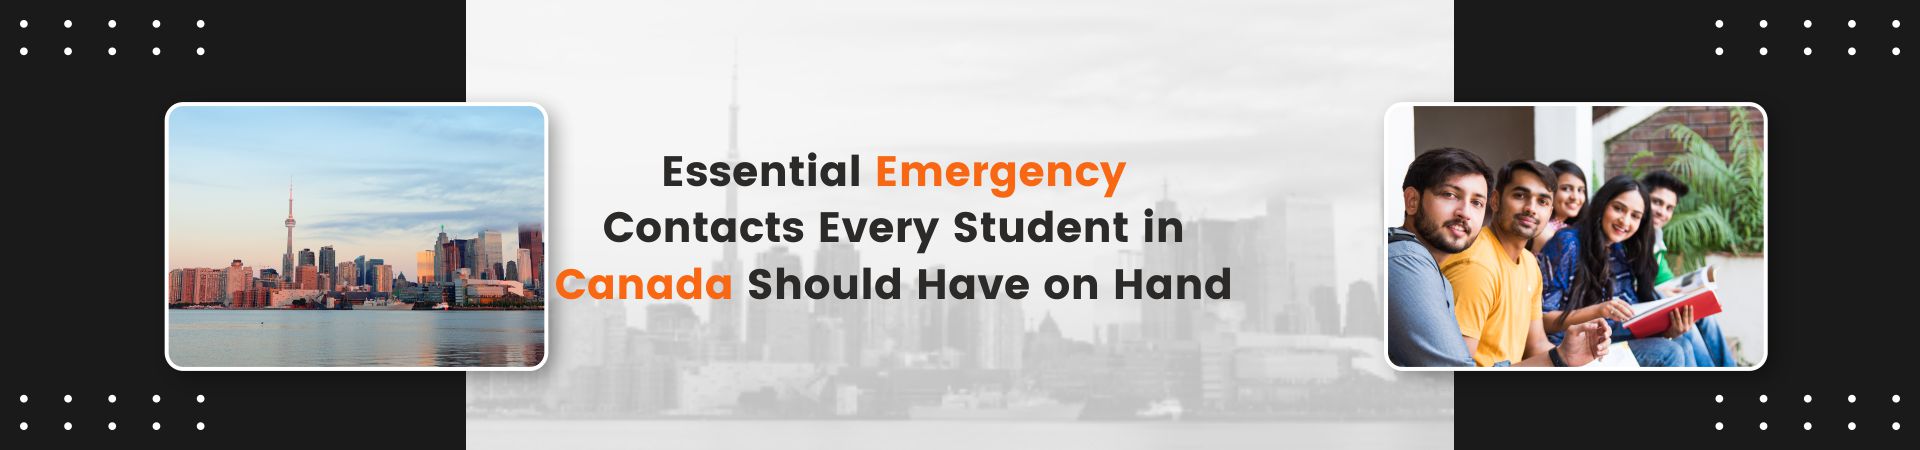 Essential Emergency Contacts Every Student in Canada Should Have on Hand